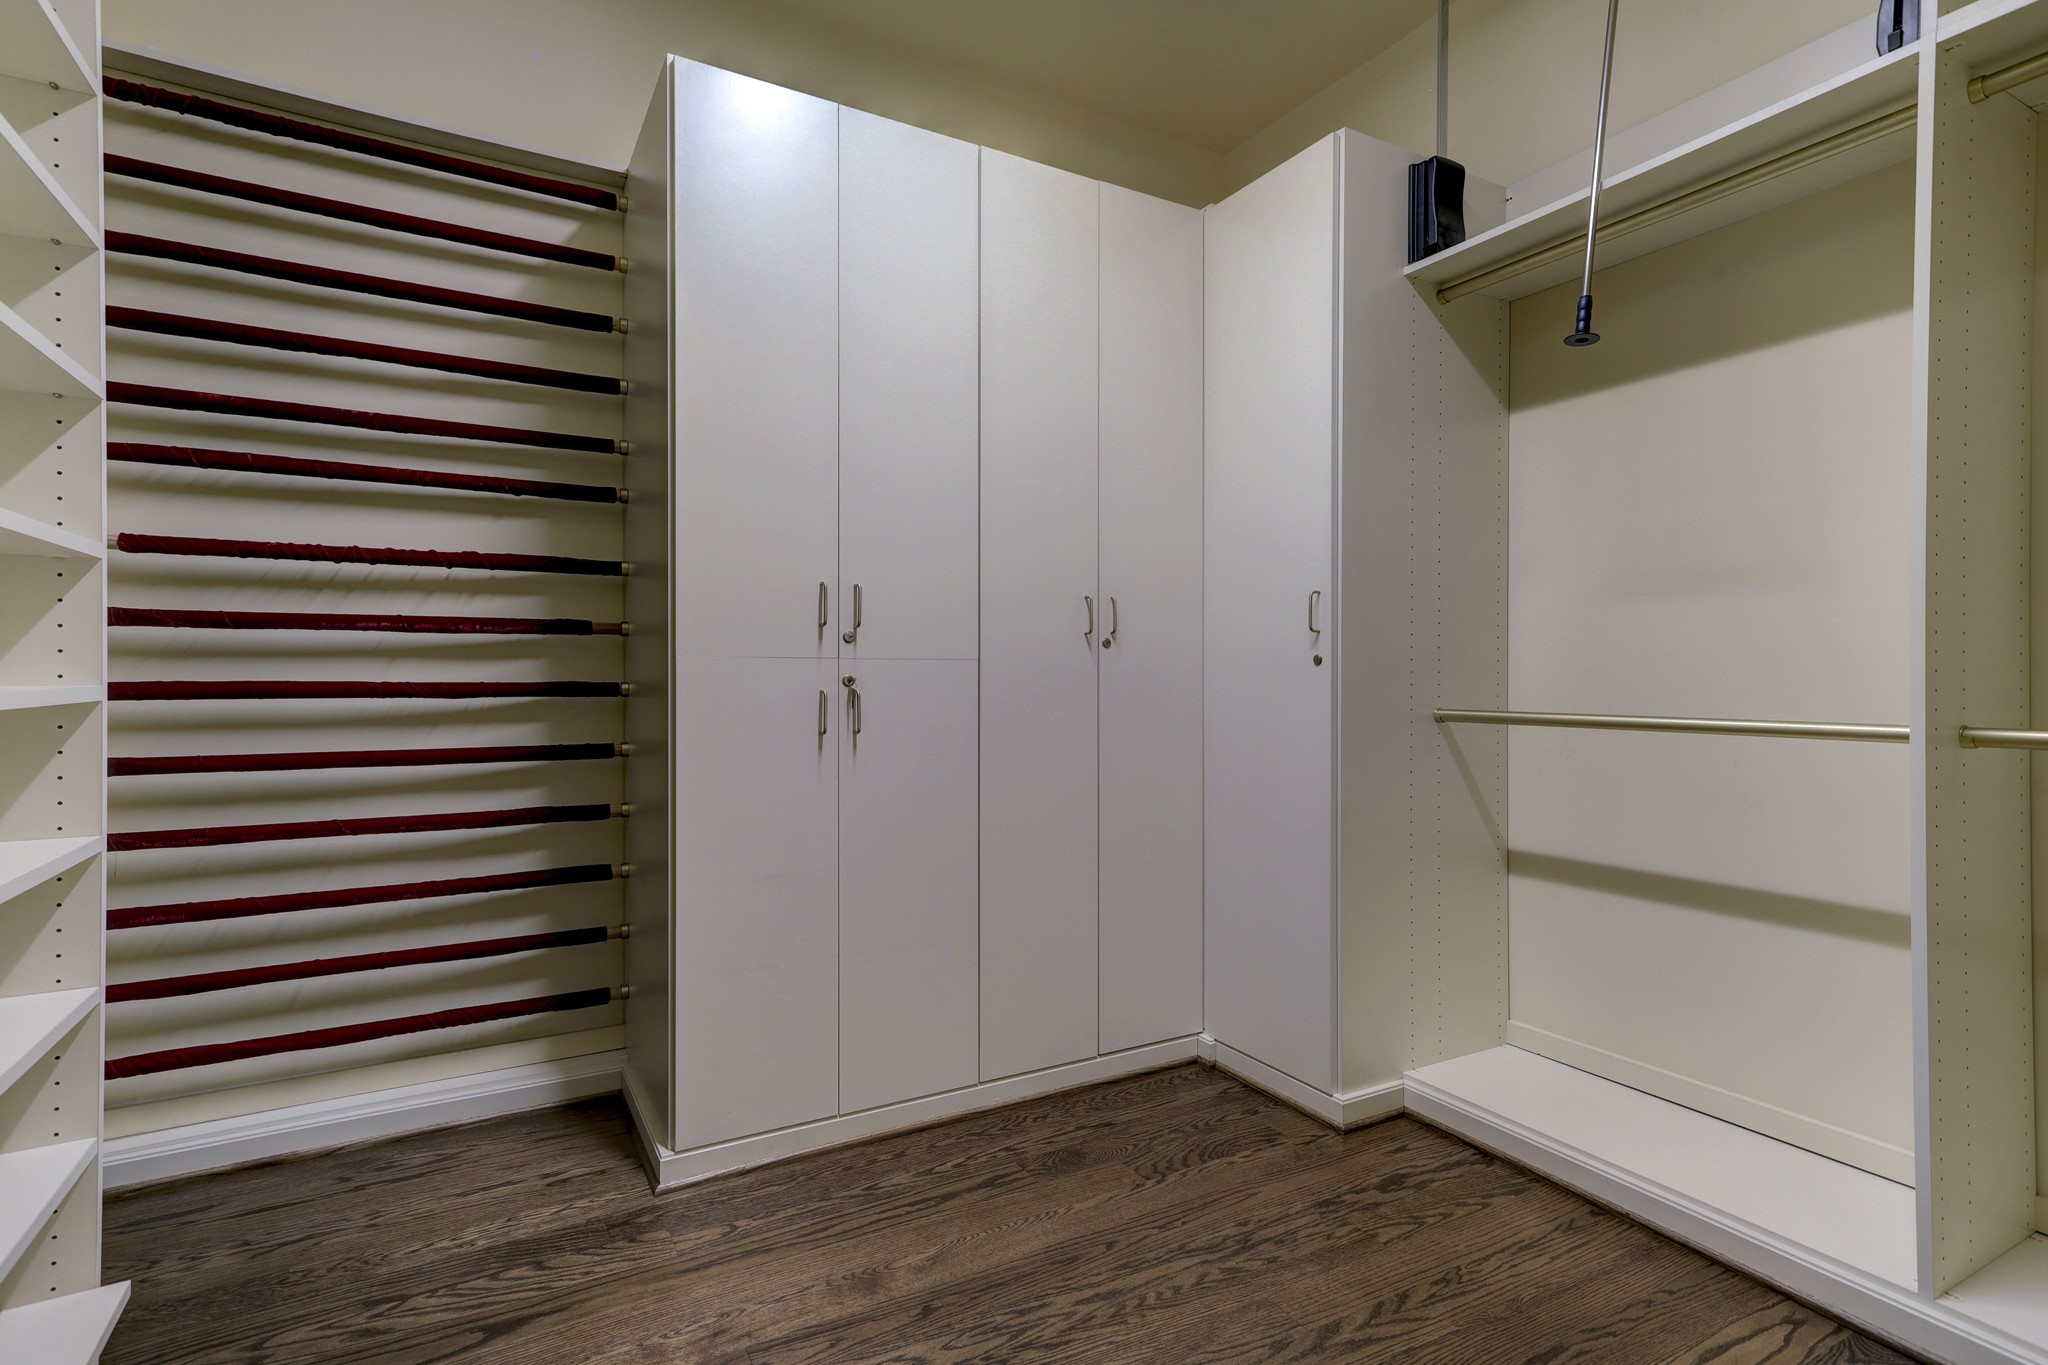 One of two large custom designed walk-in closets in the Primary Bedroom offering plenty of hanging space for all sizes.